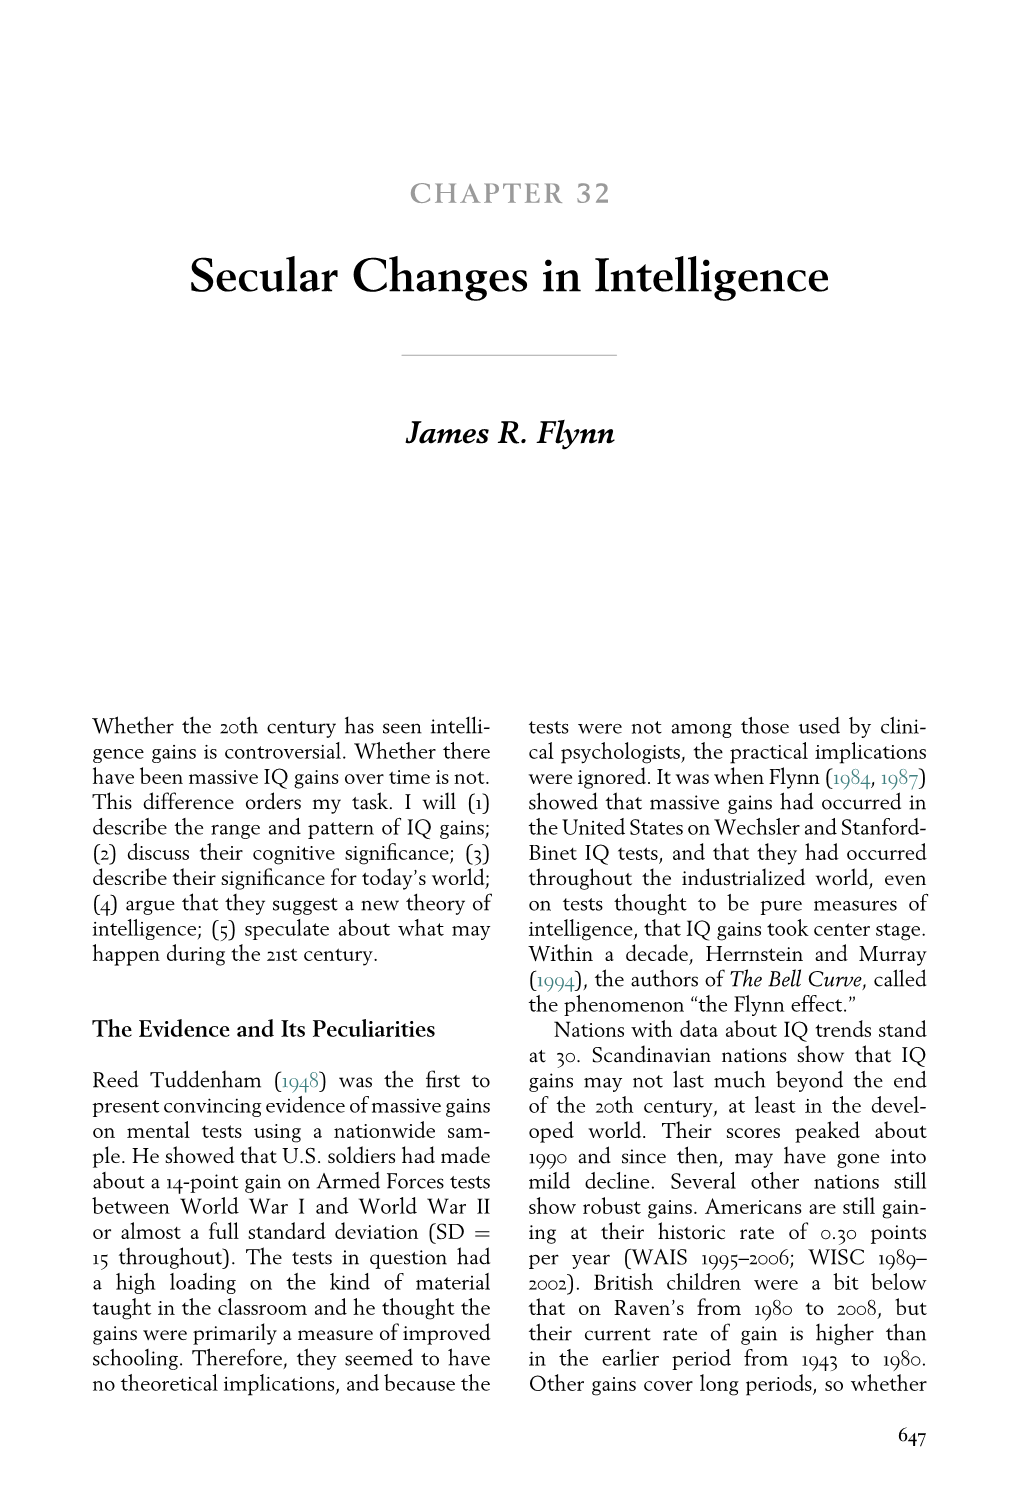 Secular Changes in Intelligence